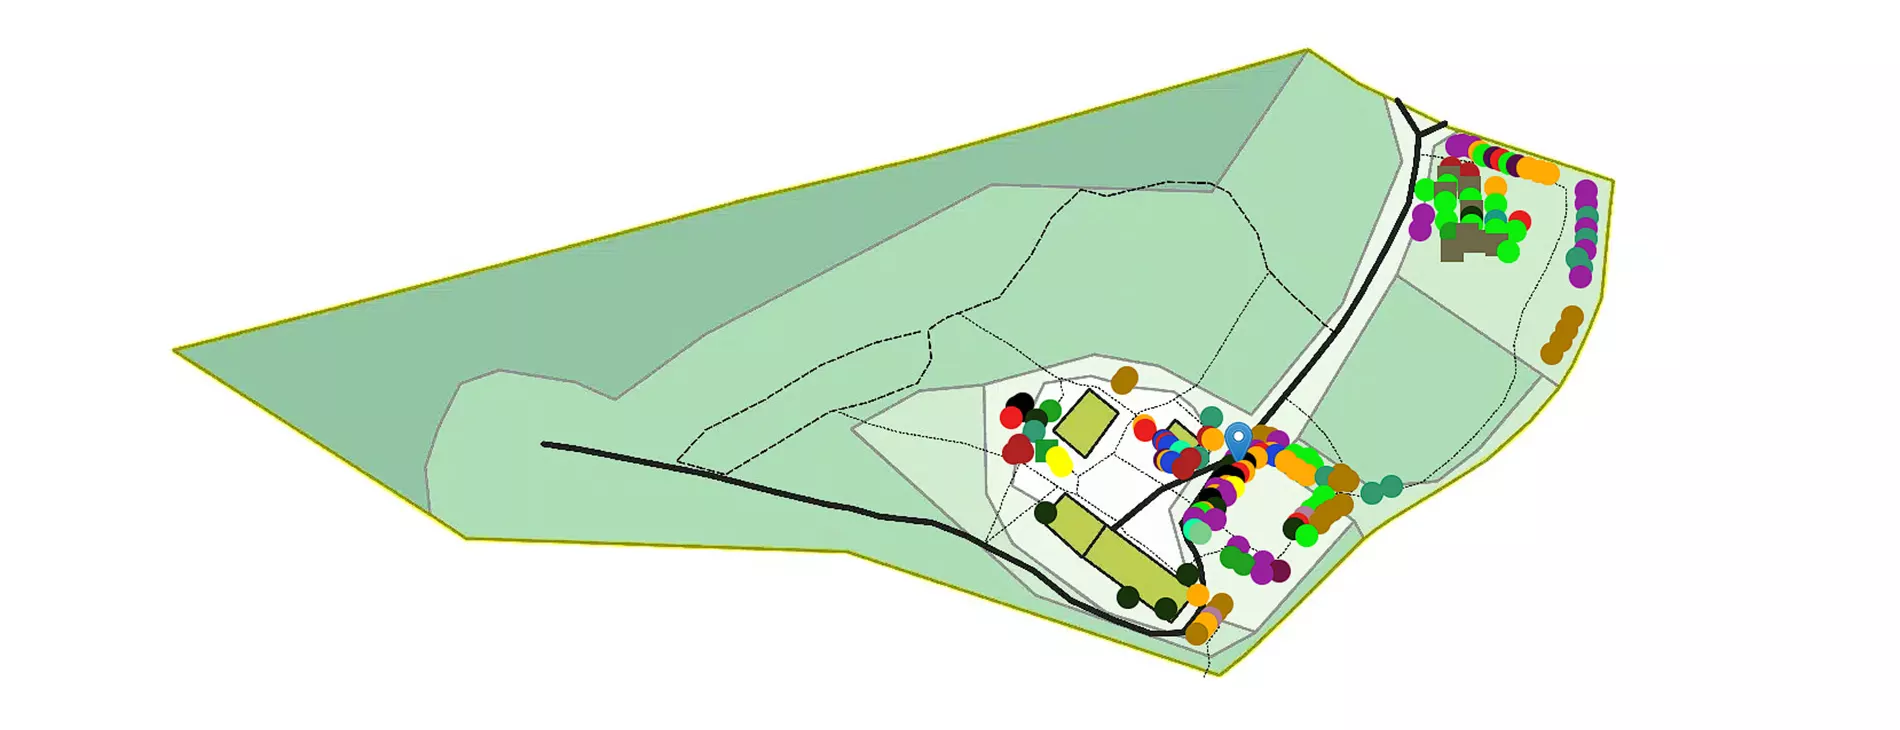 Image of the interactive map used at the Beyond Buckthorns permaculture